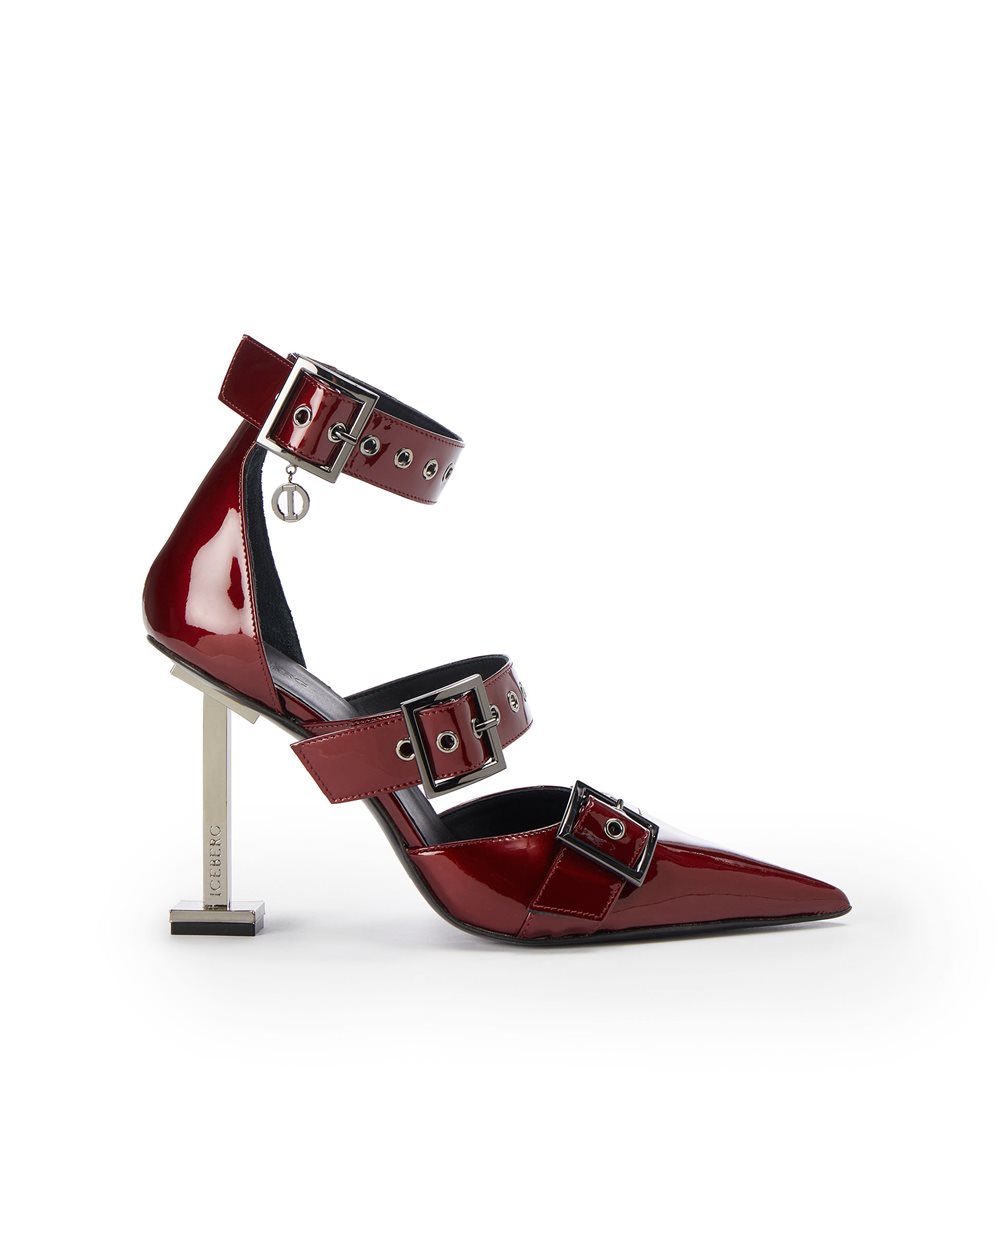 Pumps with iconic heel - SHOES | Iceberg - Official Website